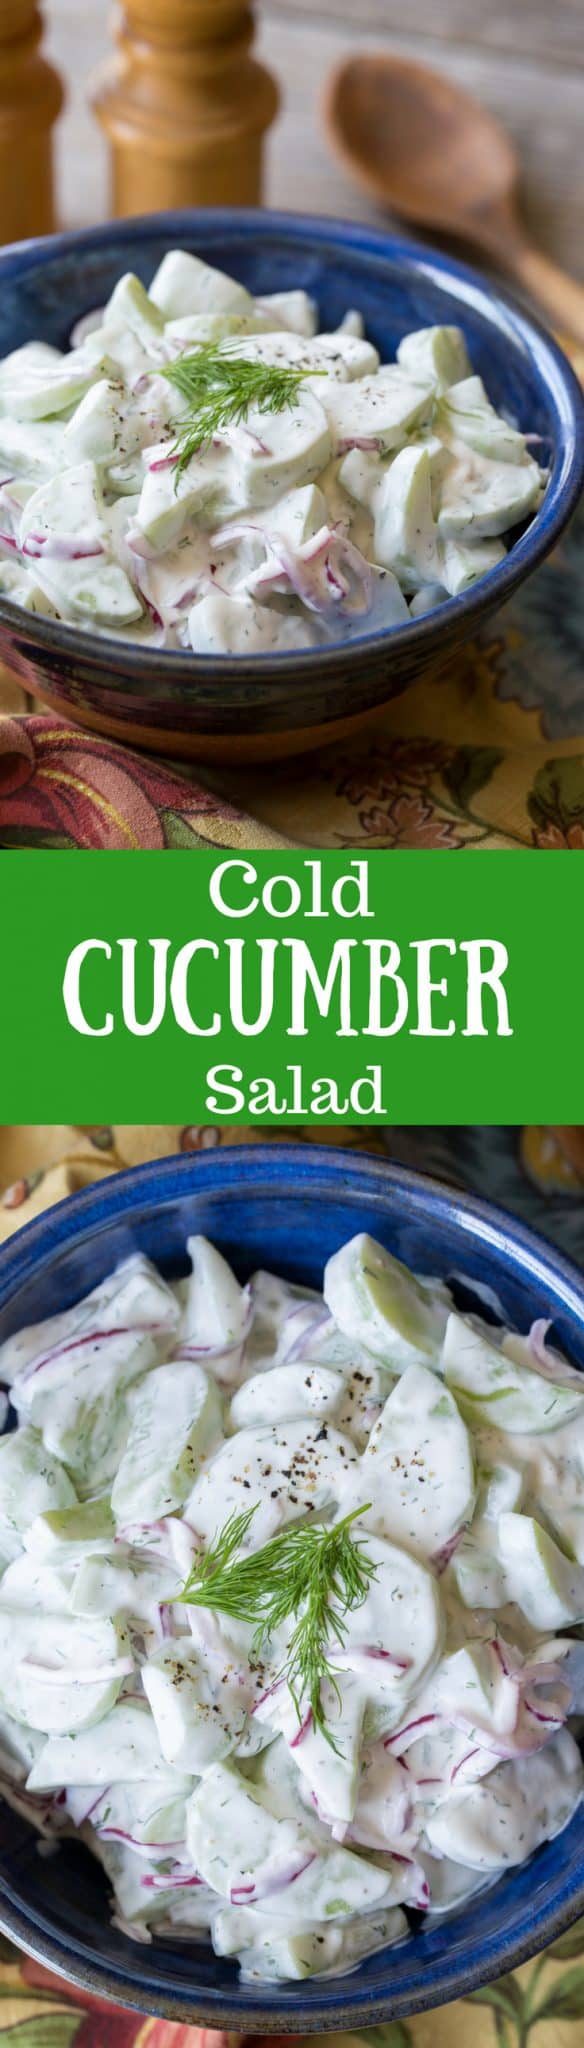 Fresh from the garden - crispy, Cold Cucumber Salad with fresh dill ~ a delicious salad made with a just a few fresh ingredients. Think creamy dill pickle! www.savingdessert.com